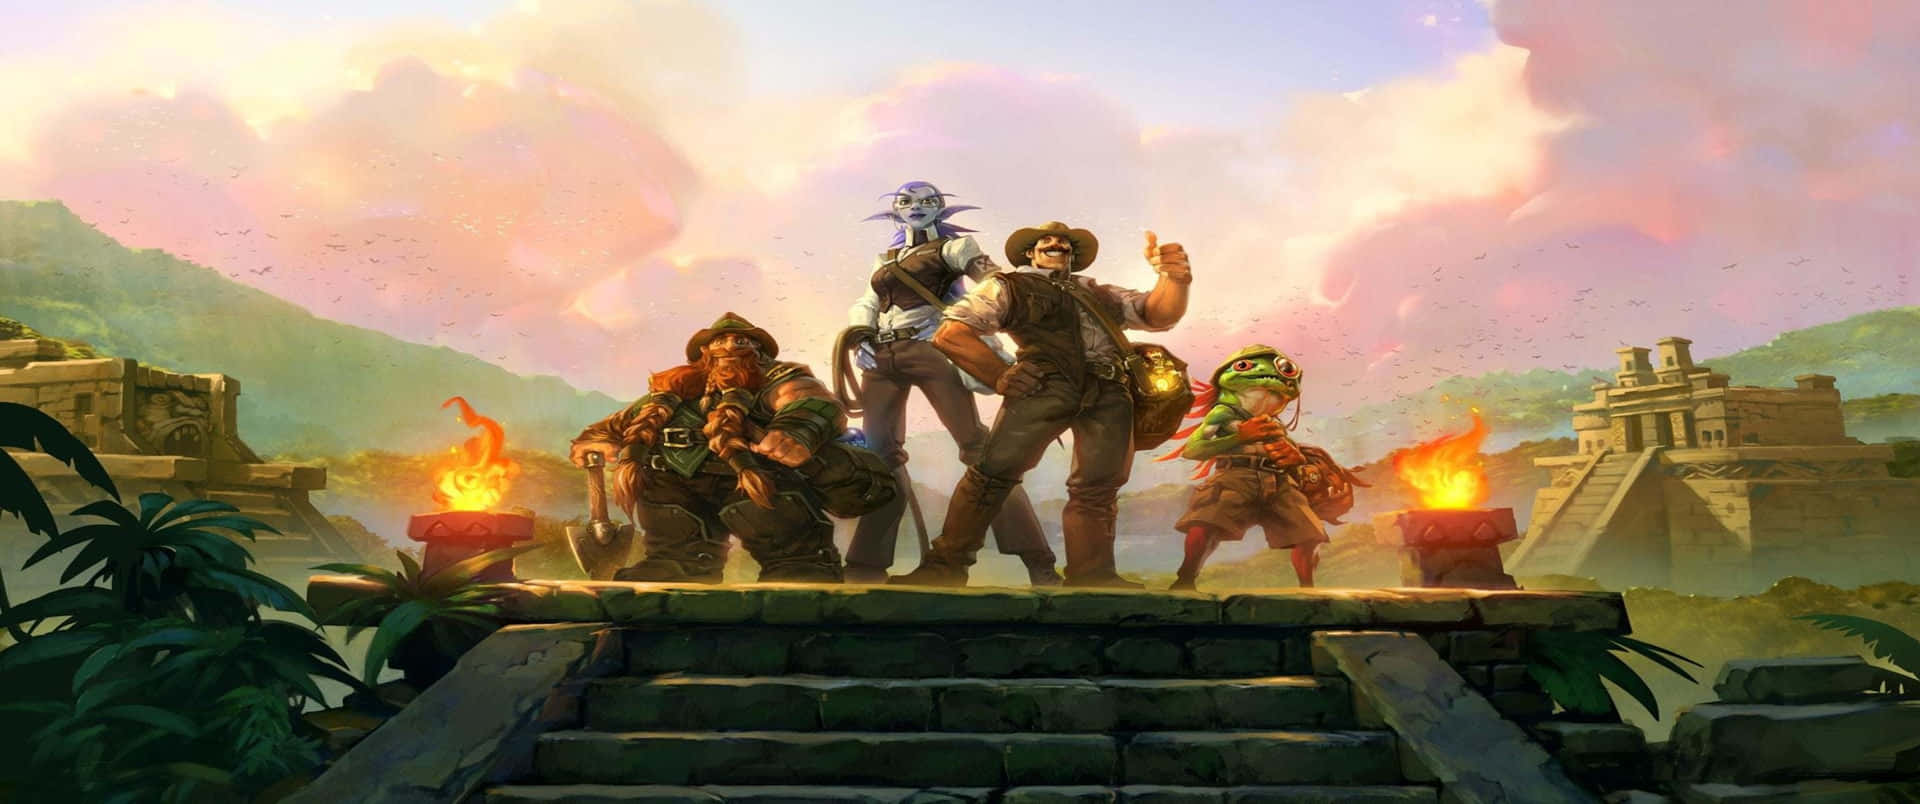 Epic Hearthstone Illustration in Ultra High Resolution